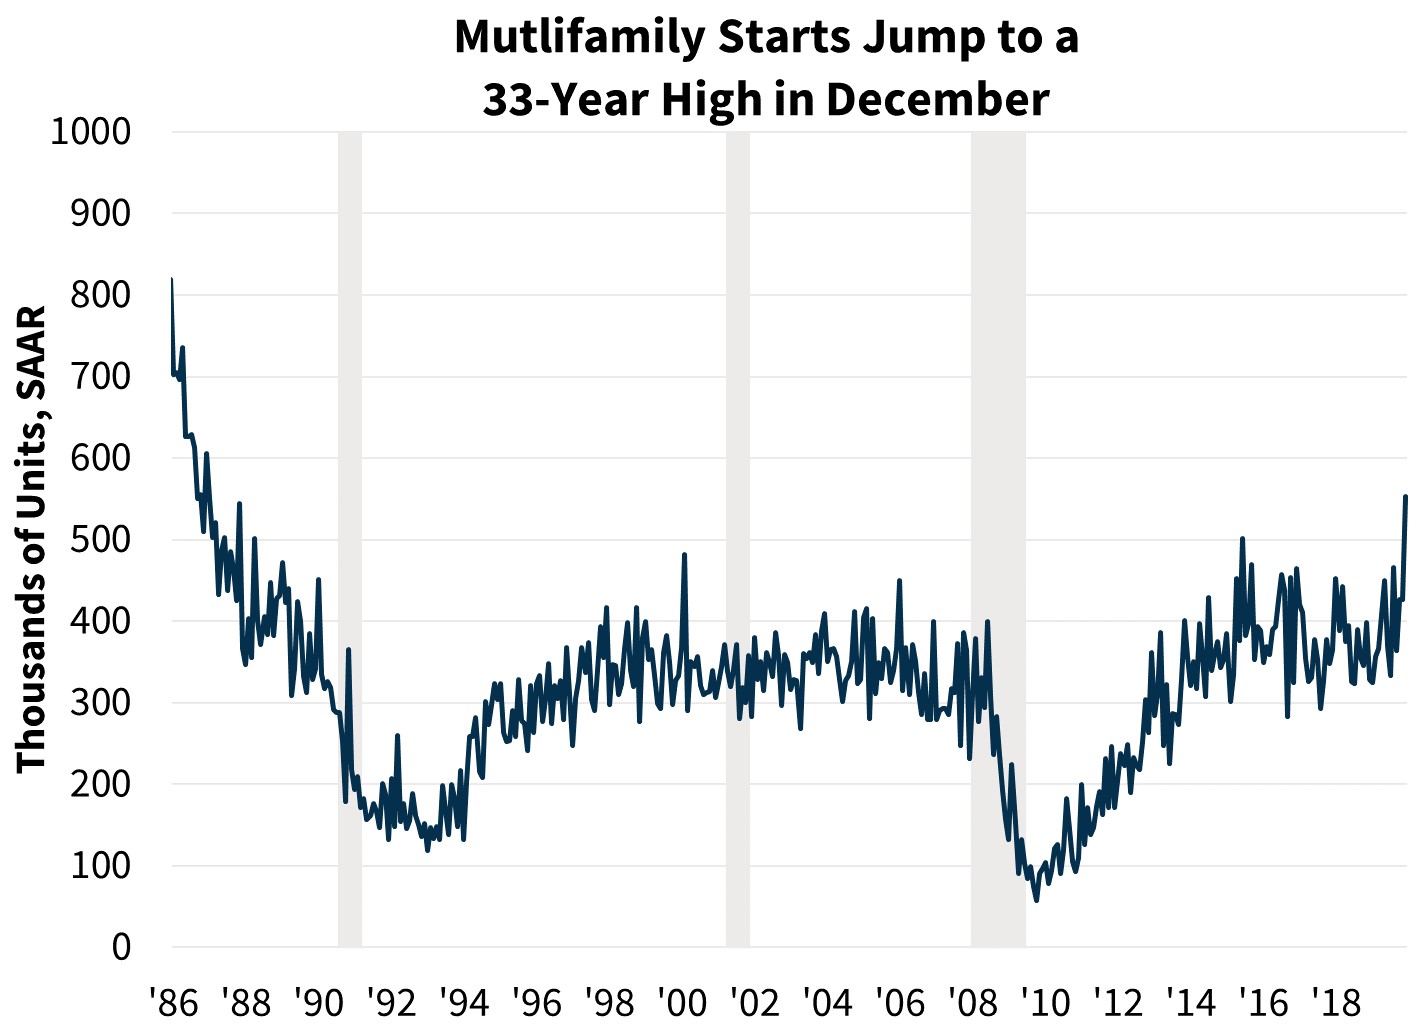 Multifamily Starts Jump to a 33-Year High in December